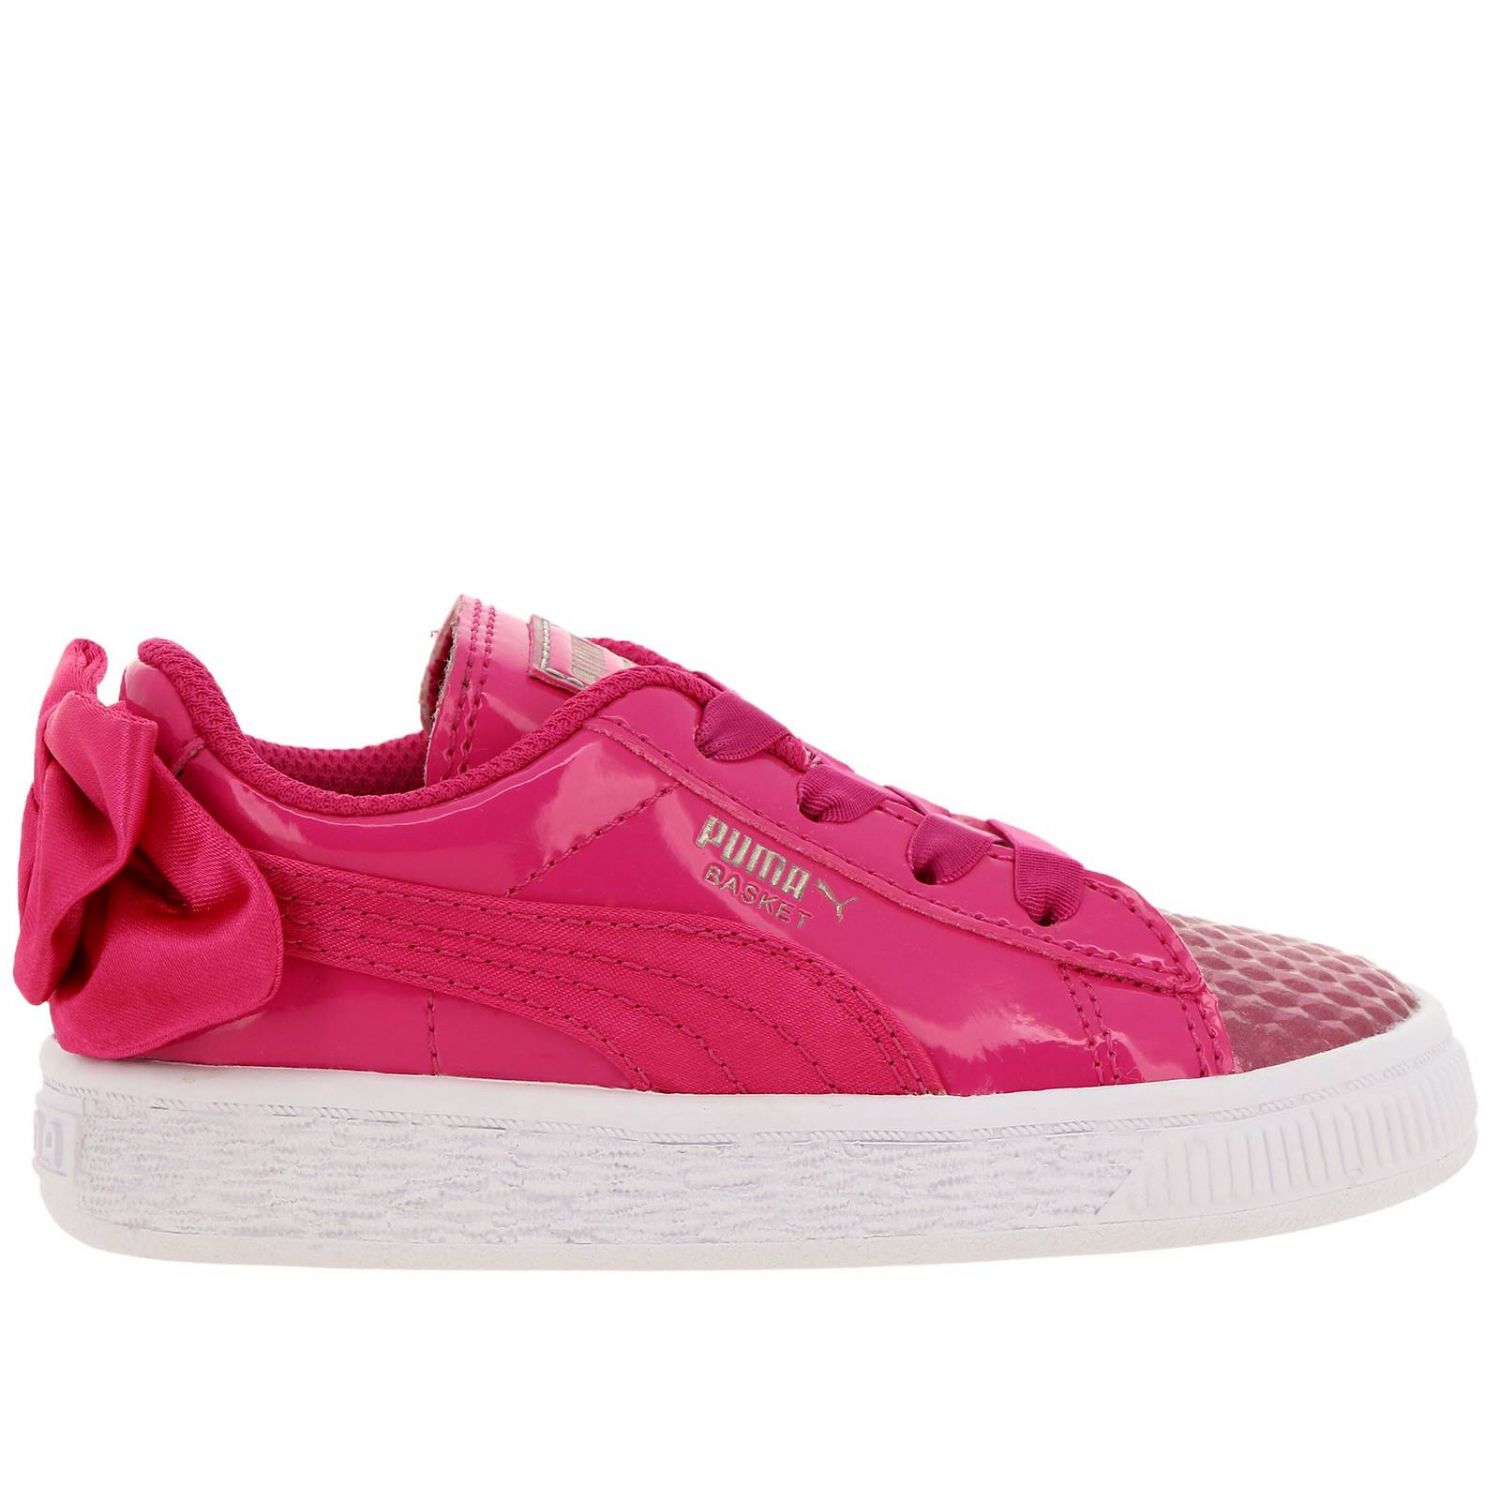 Puma Outlet: shoes for girls - Fuchsia | Puma shoes 368986 online on ...